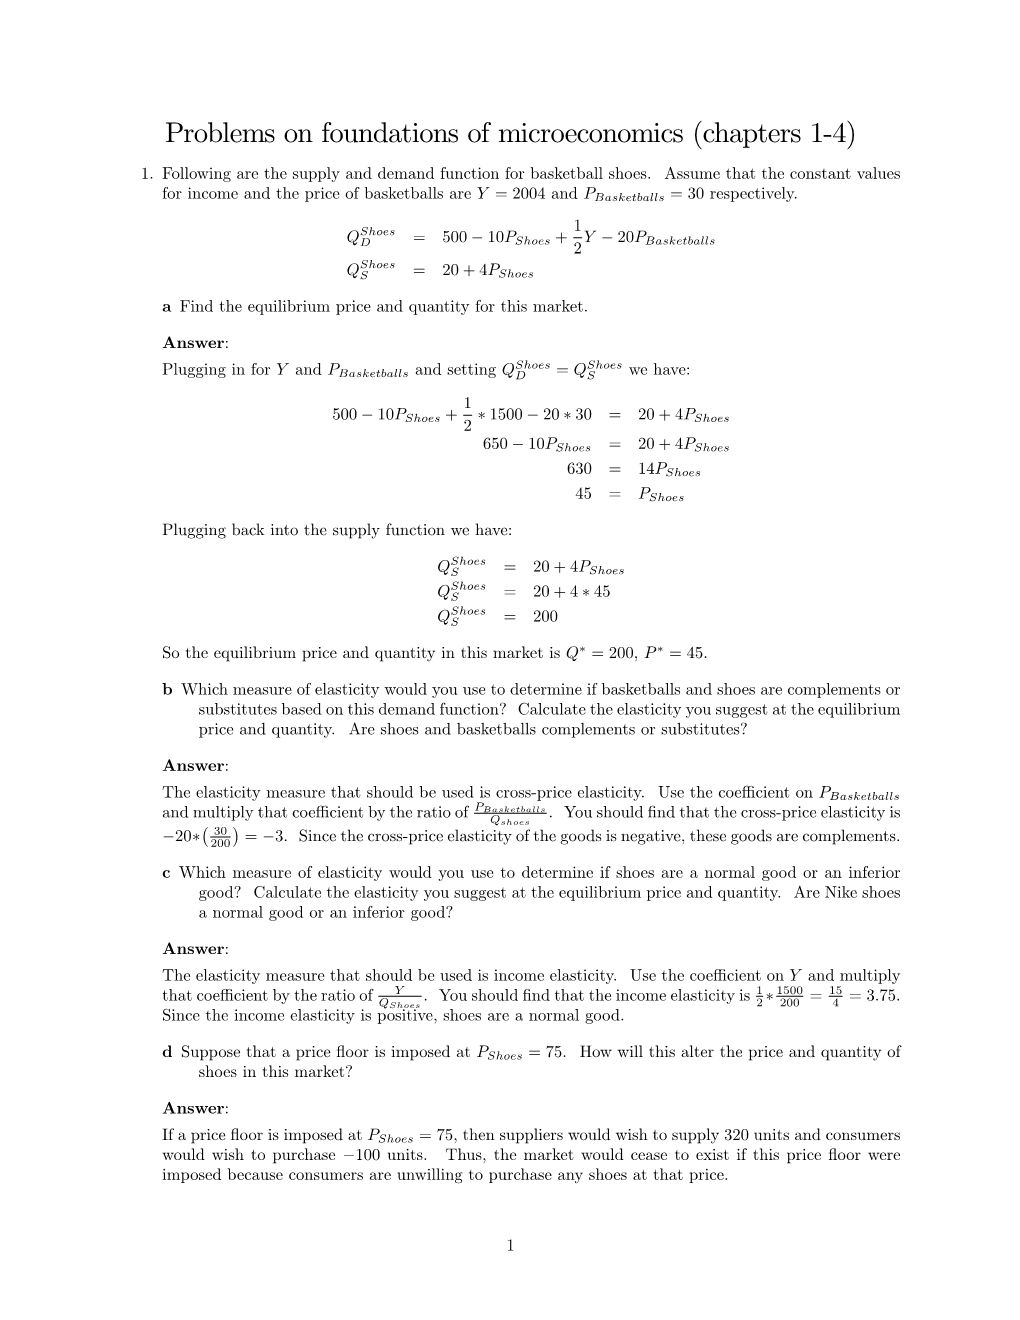 Problems on Foundations of Microeconomics (Chapters 1-4)